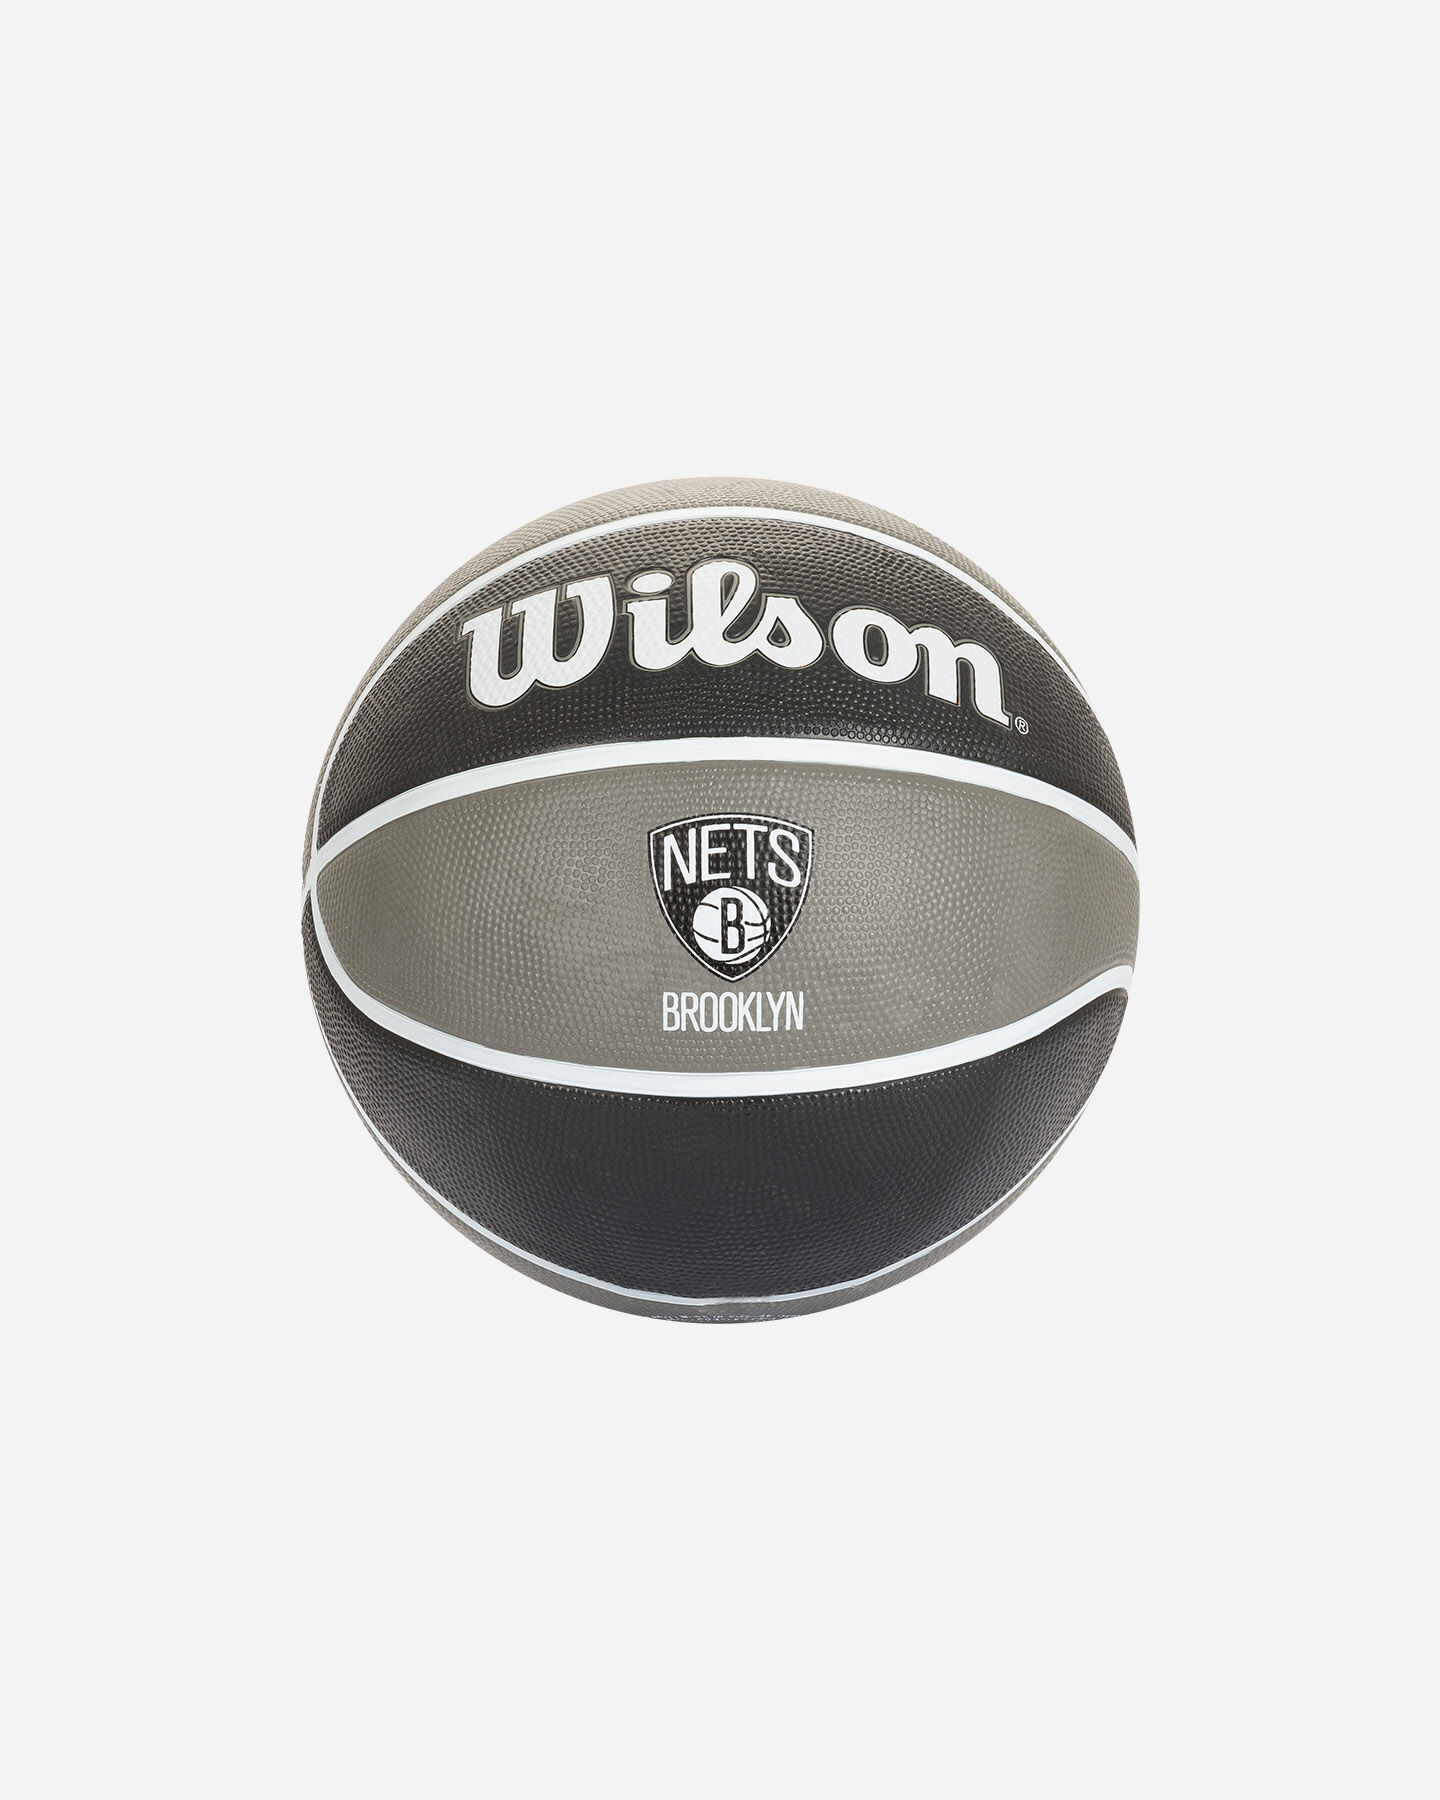  Pallone basket WILSON NBA TRIBUTE TEAM BROOKLYN NETS  S5331459|UNI|OFFICIAL scatto 0